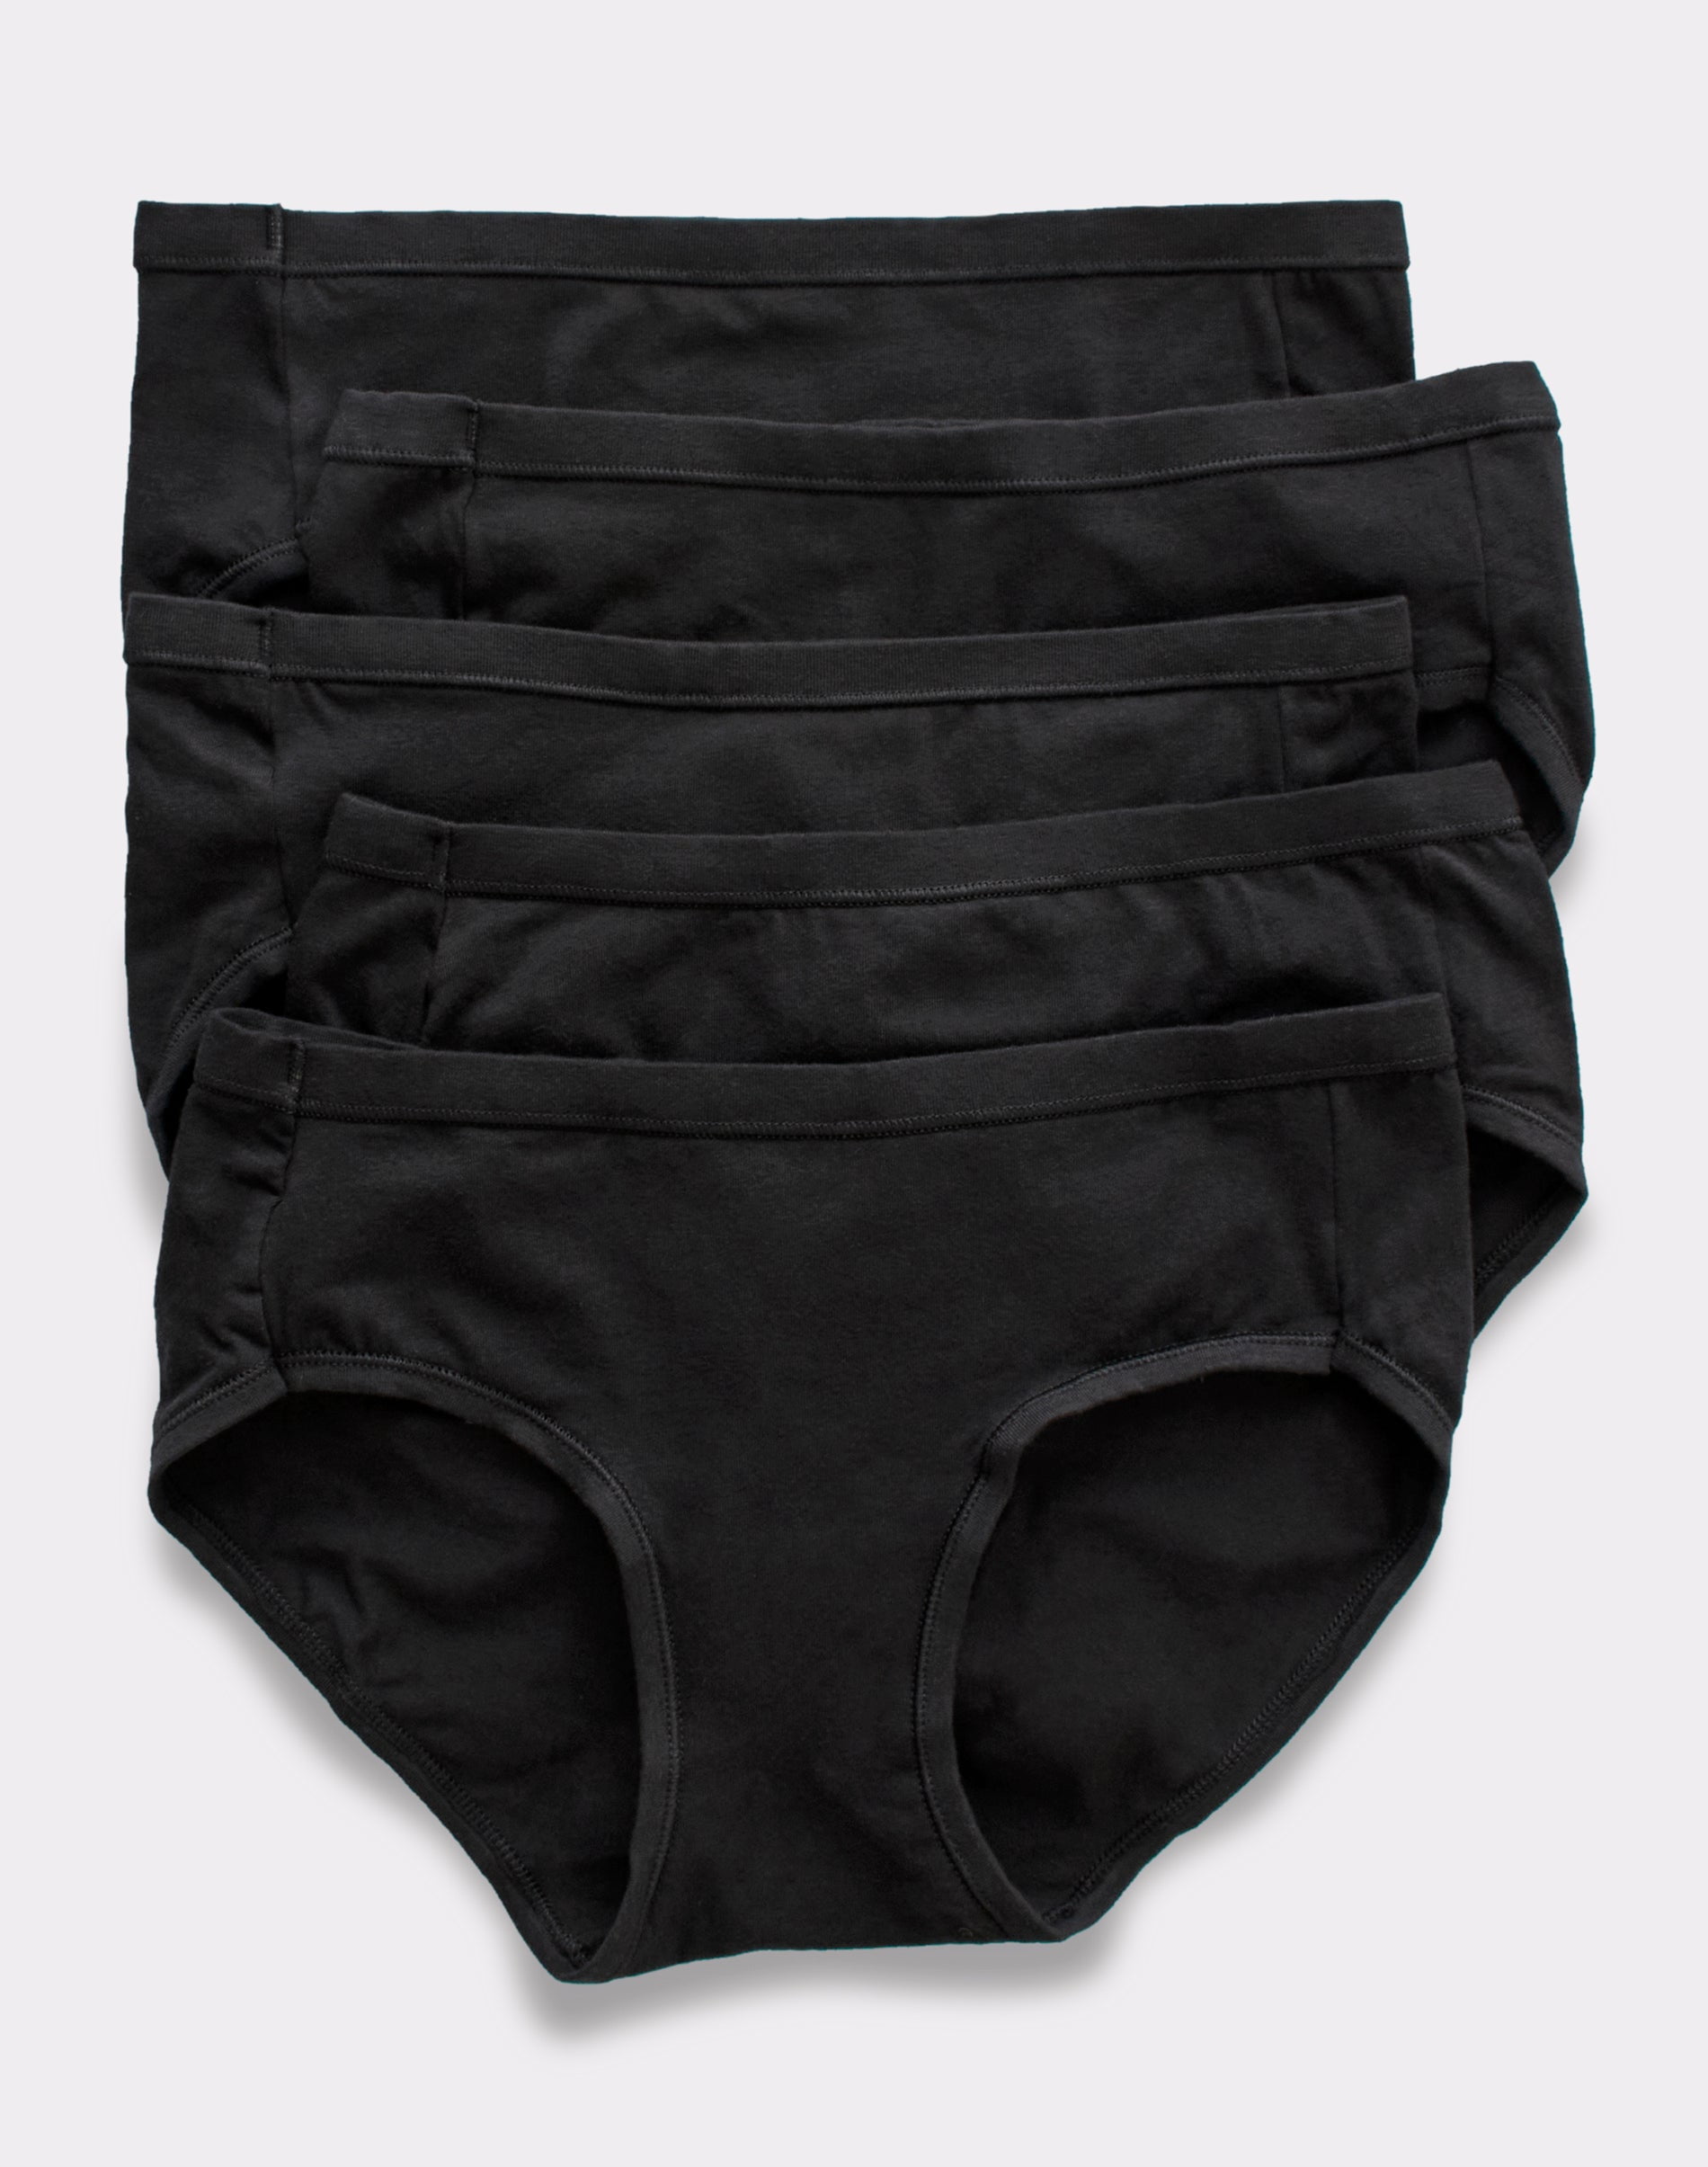 Hanes Ultimate ComfortSoft Women's Hipster Underwear, 5-Pack Black/Black/ Black/Black/Black 9 